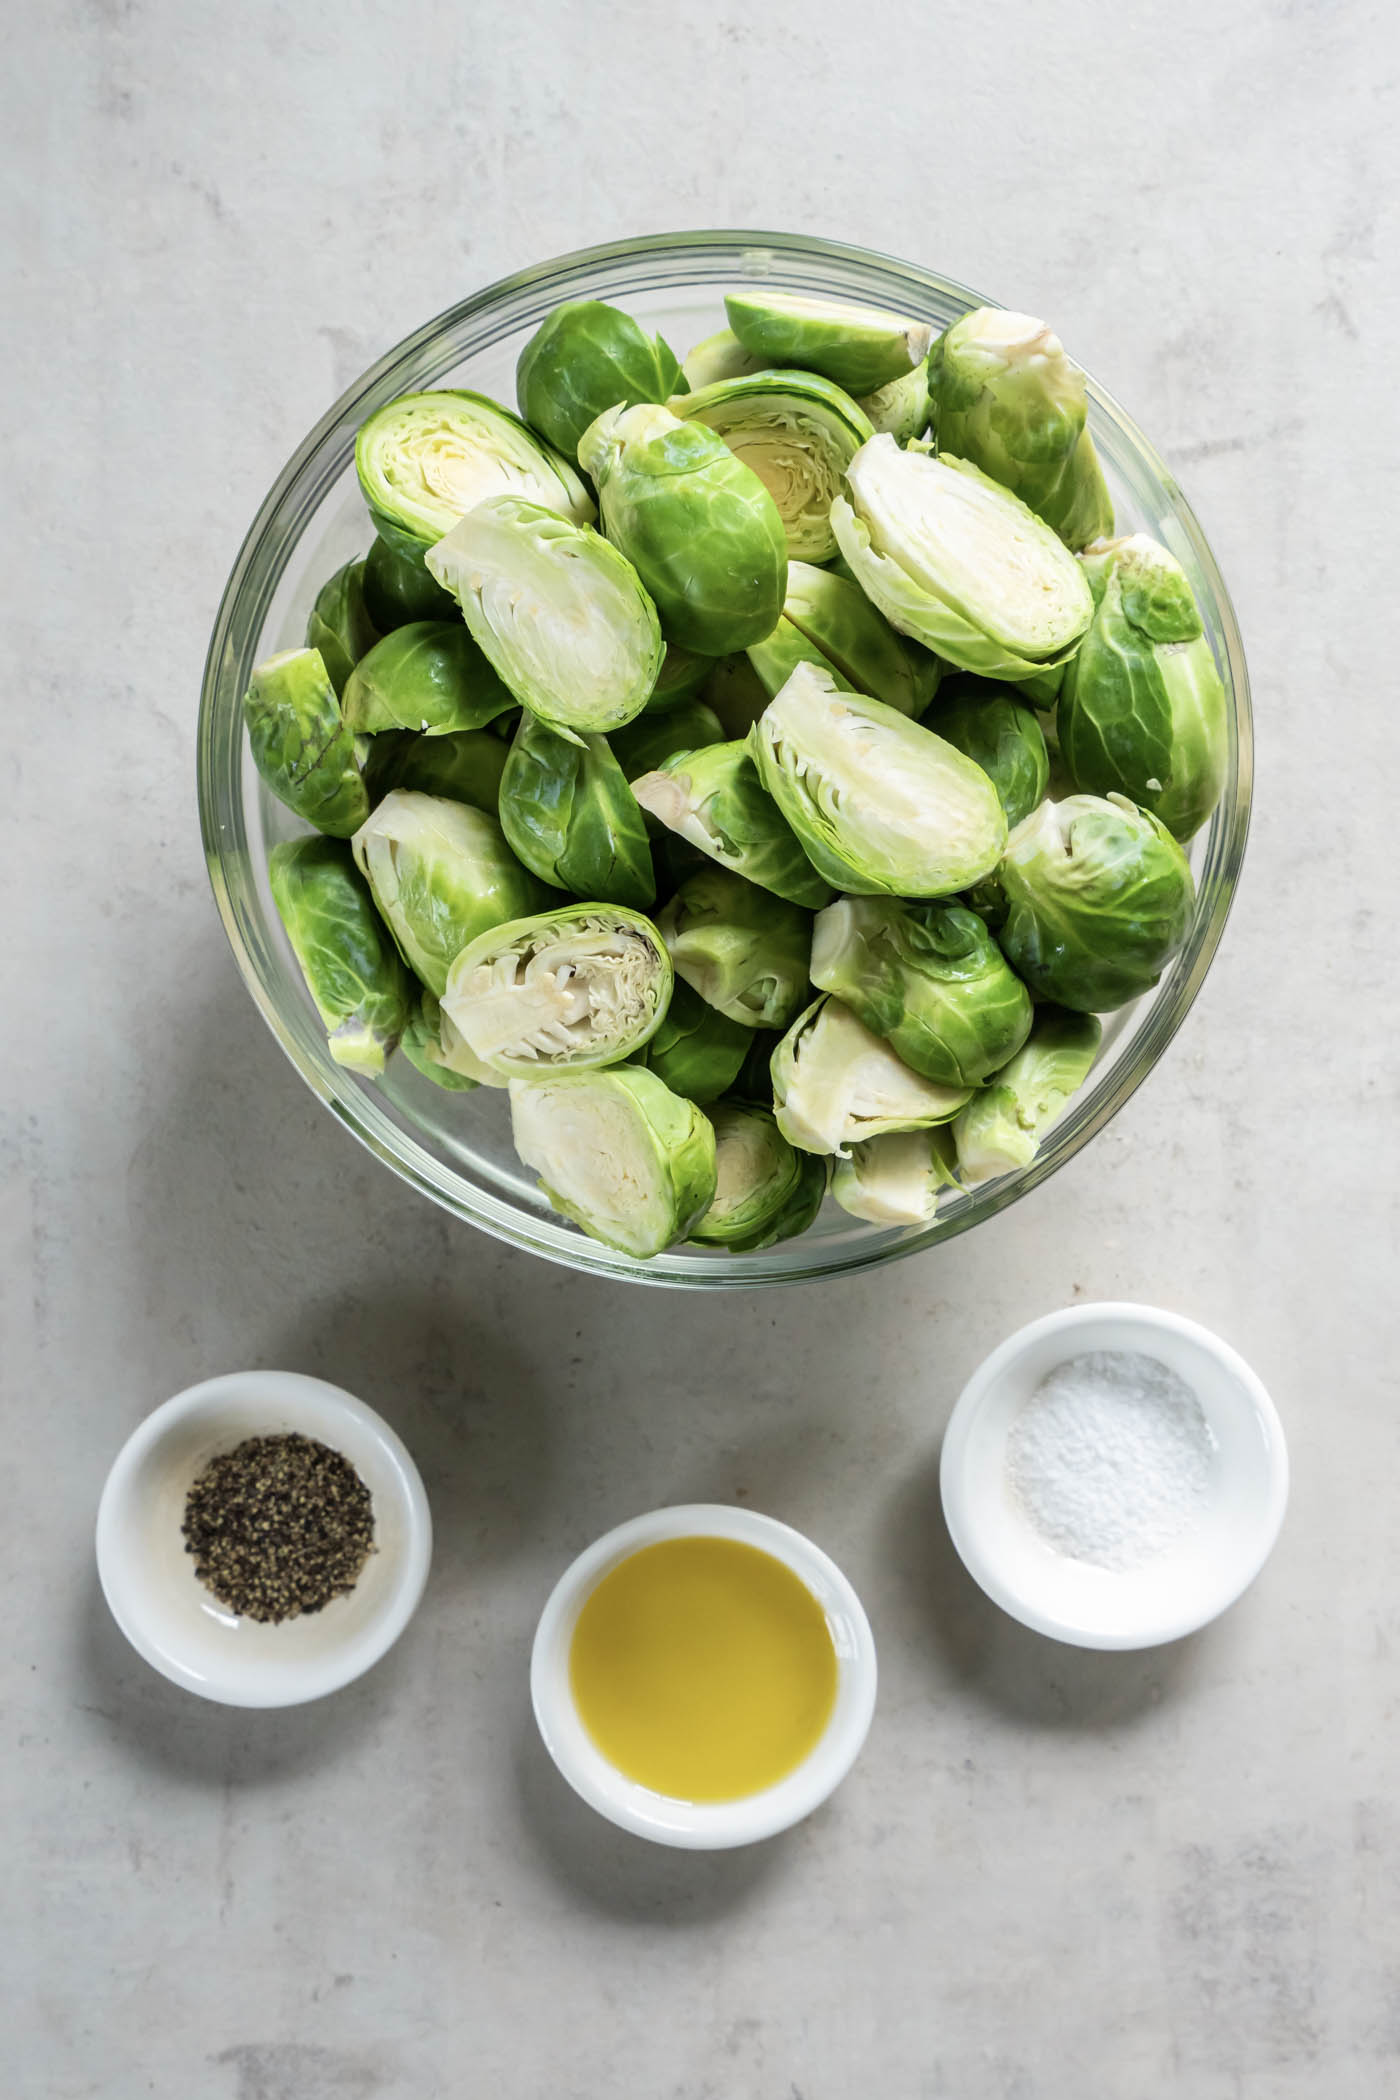 Ingredients for Brussels sprouts recipe.